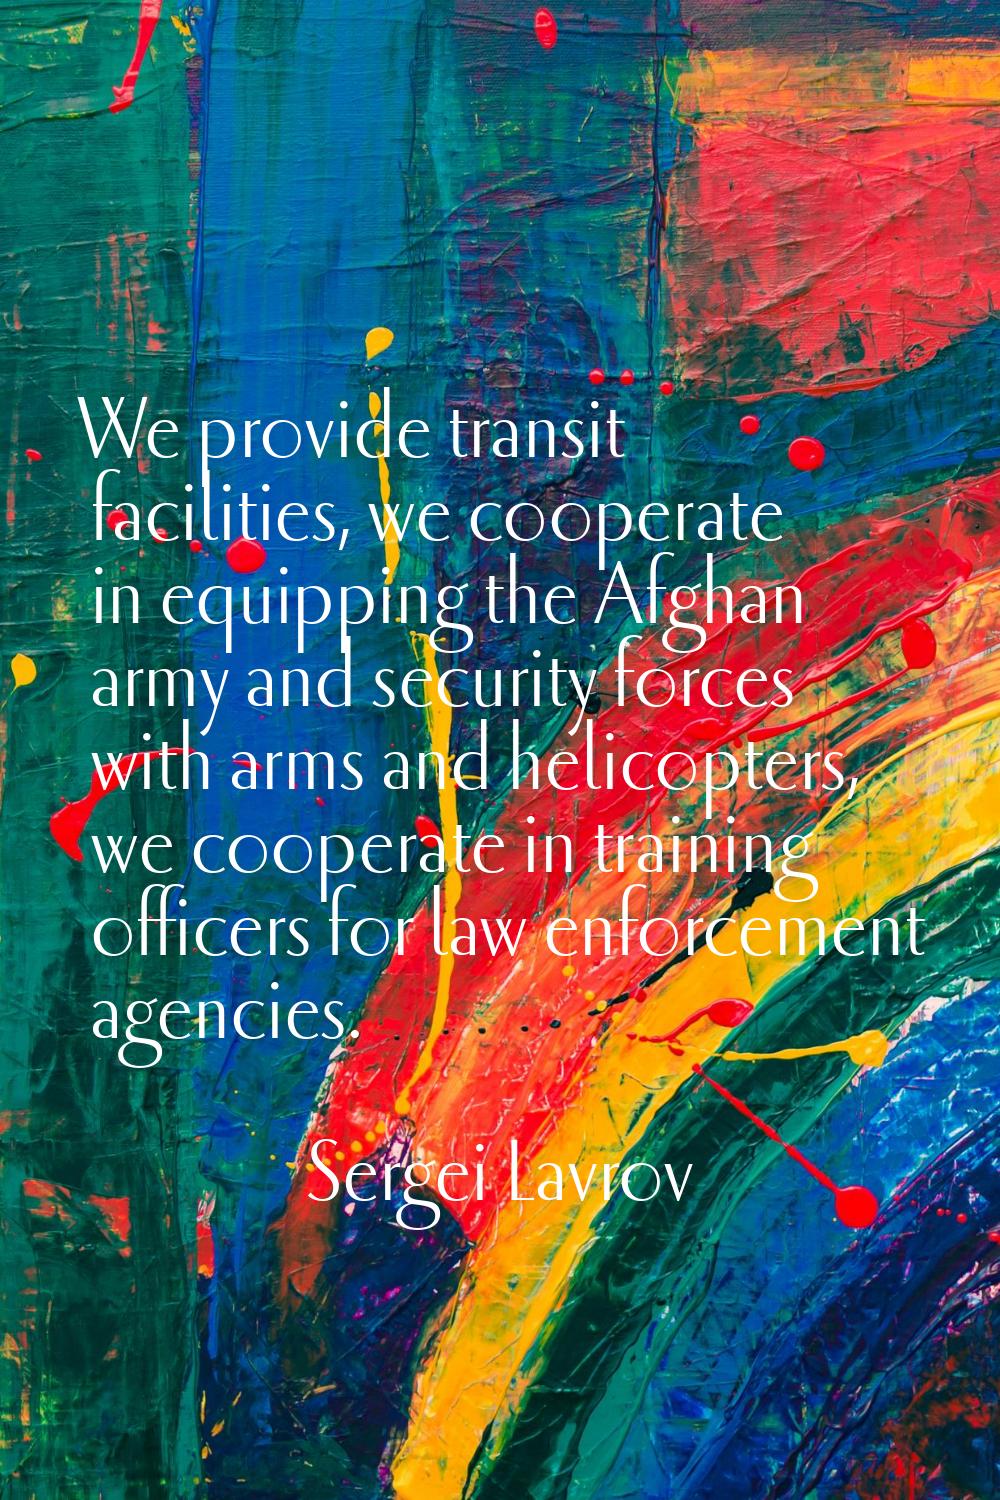 We provide transit facilities, we cooperate in equipping the Afghan army and security forces with a